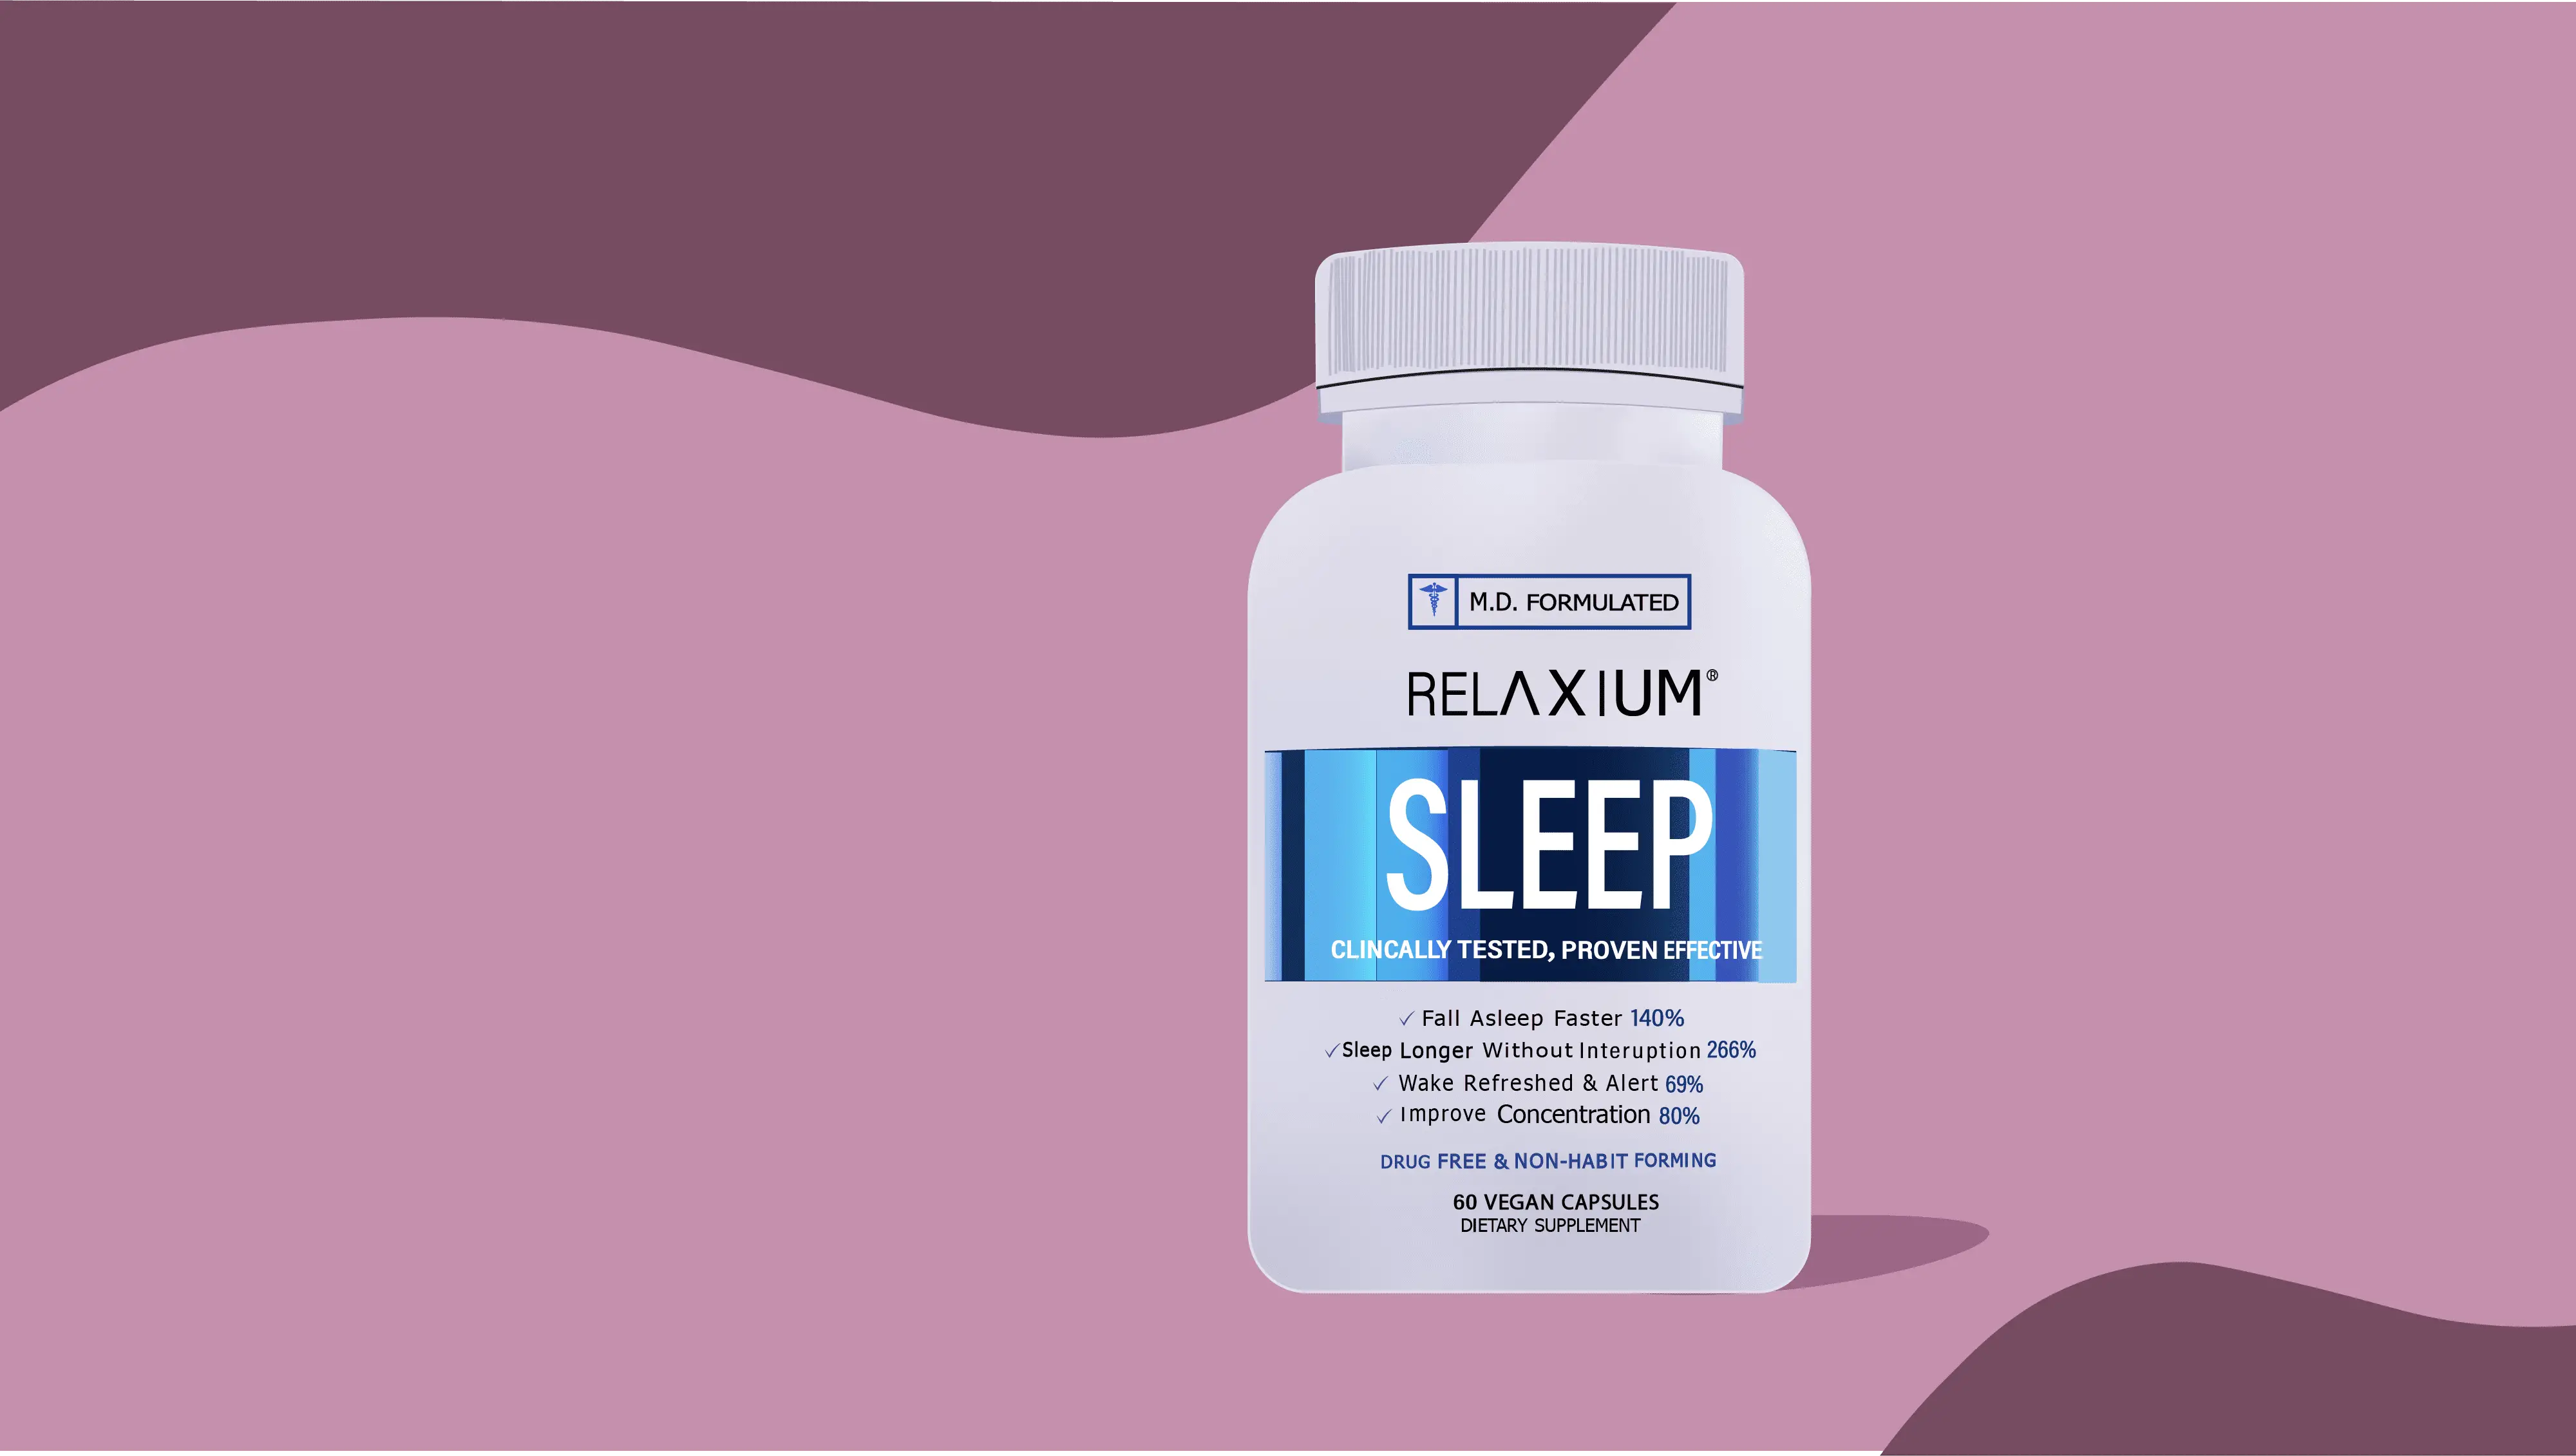 Relaxium Sleep Side Effects – The Risks of Taking Relaxium